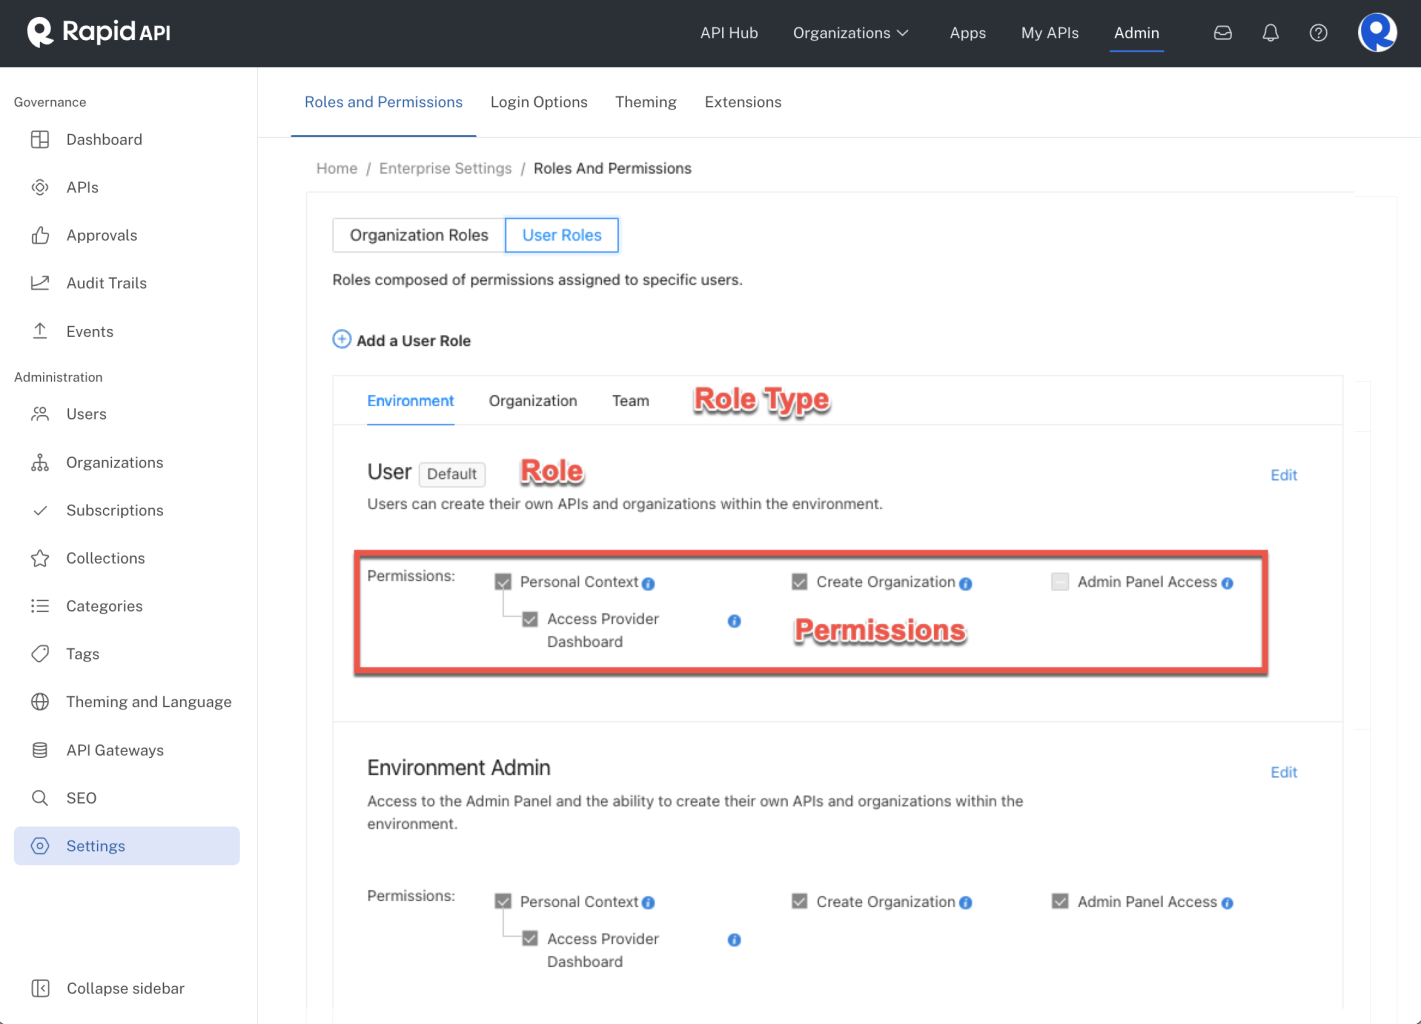 Role types, roles, and permissions in the Admin Panel.